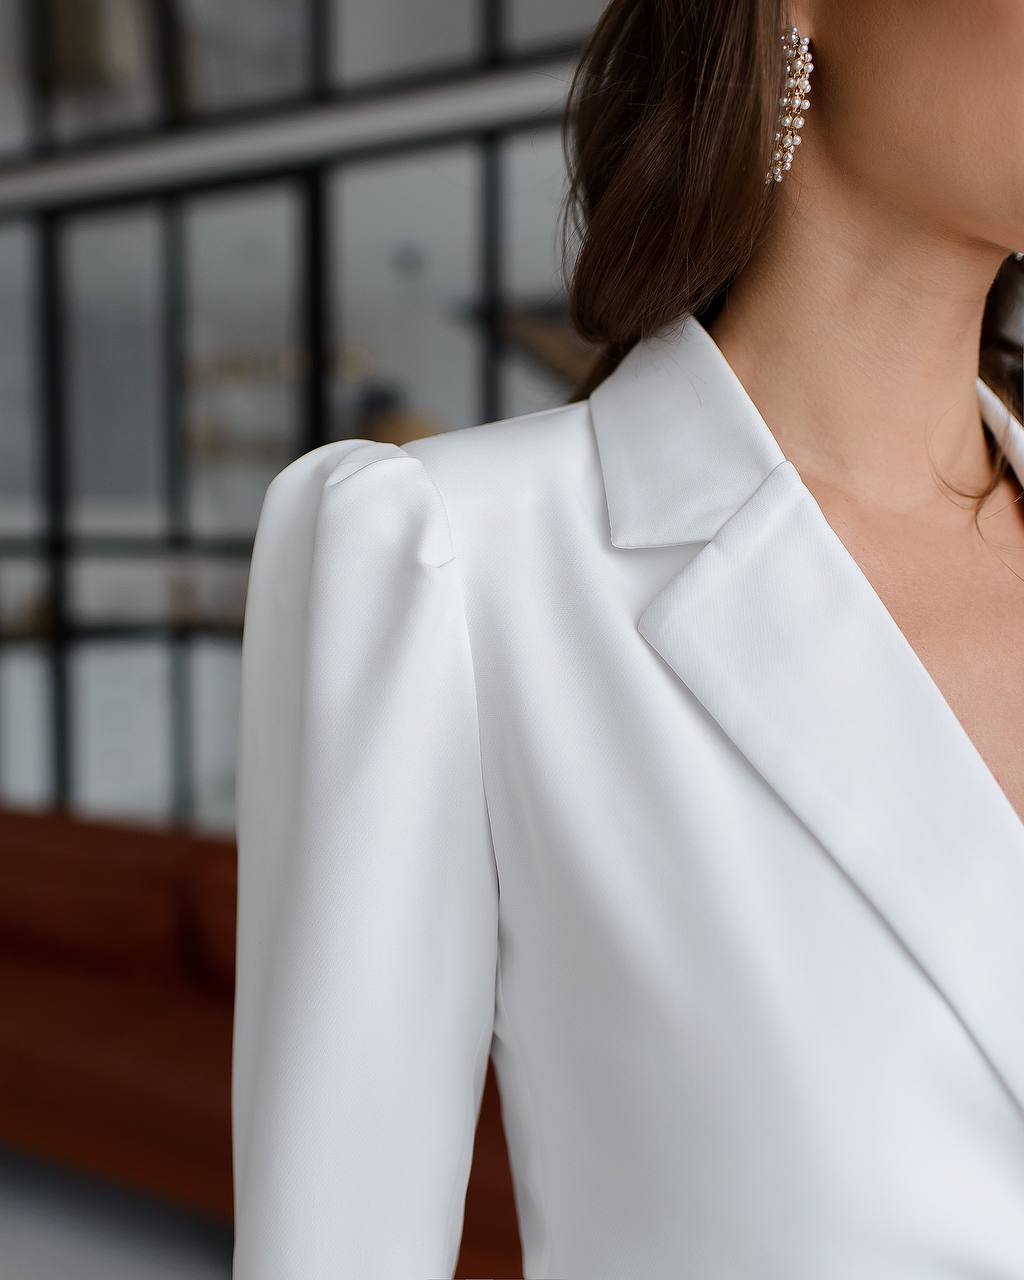 a woman wearing a white suit and earrings